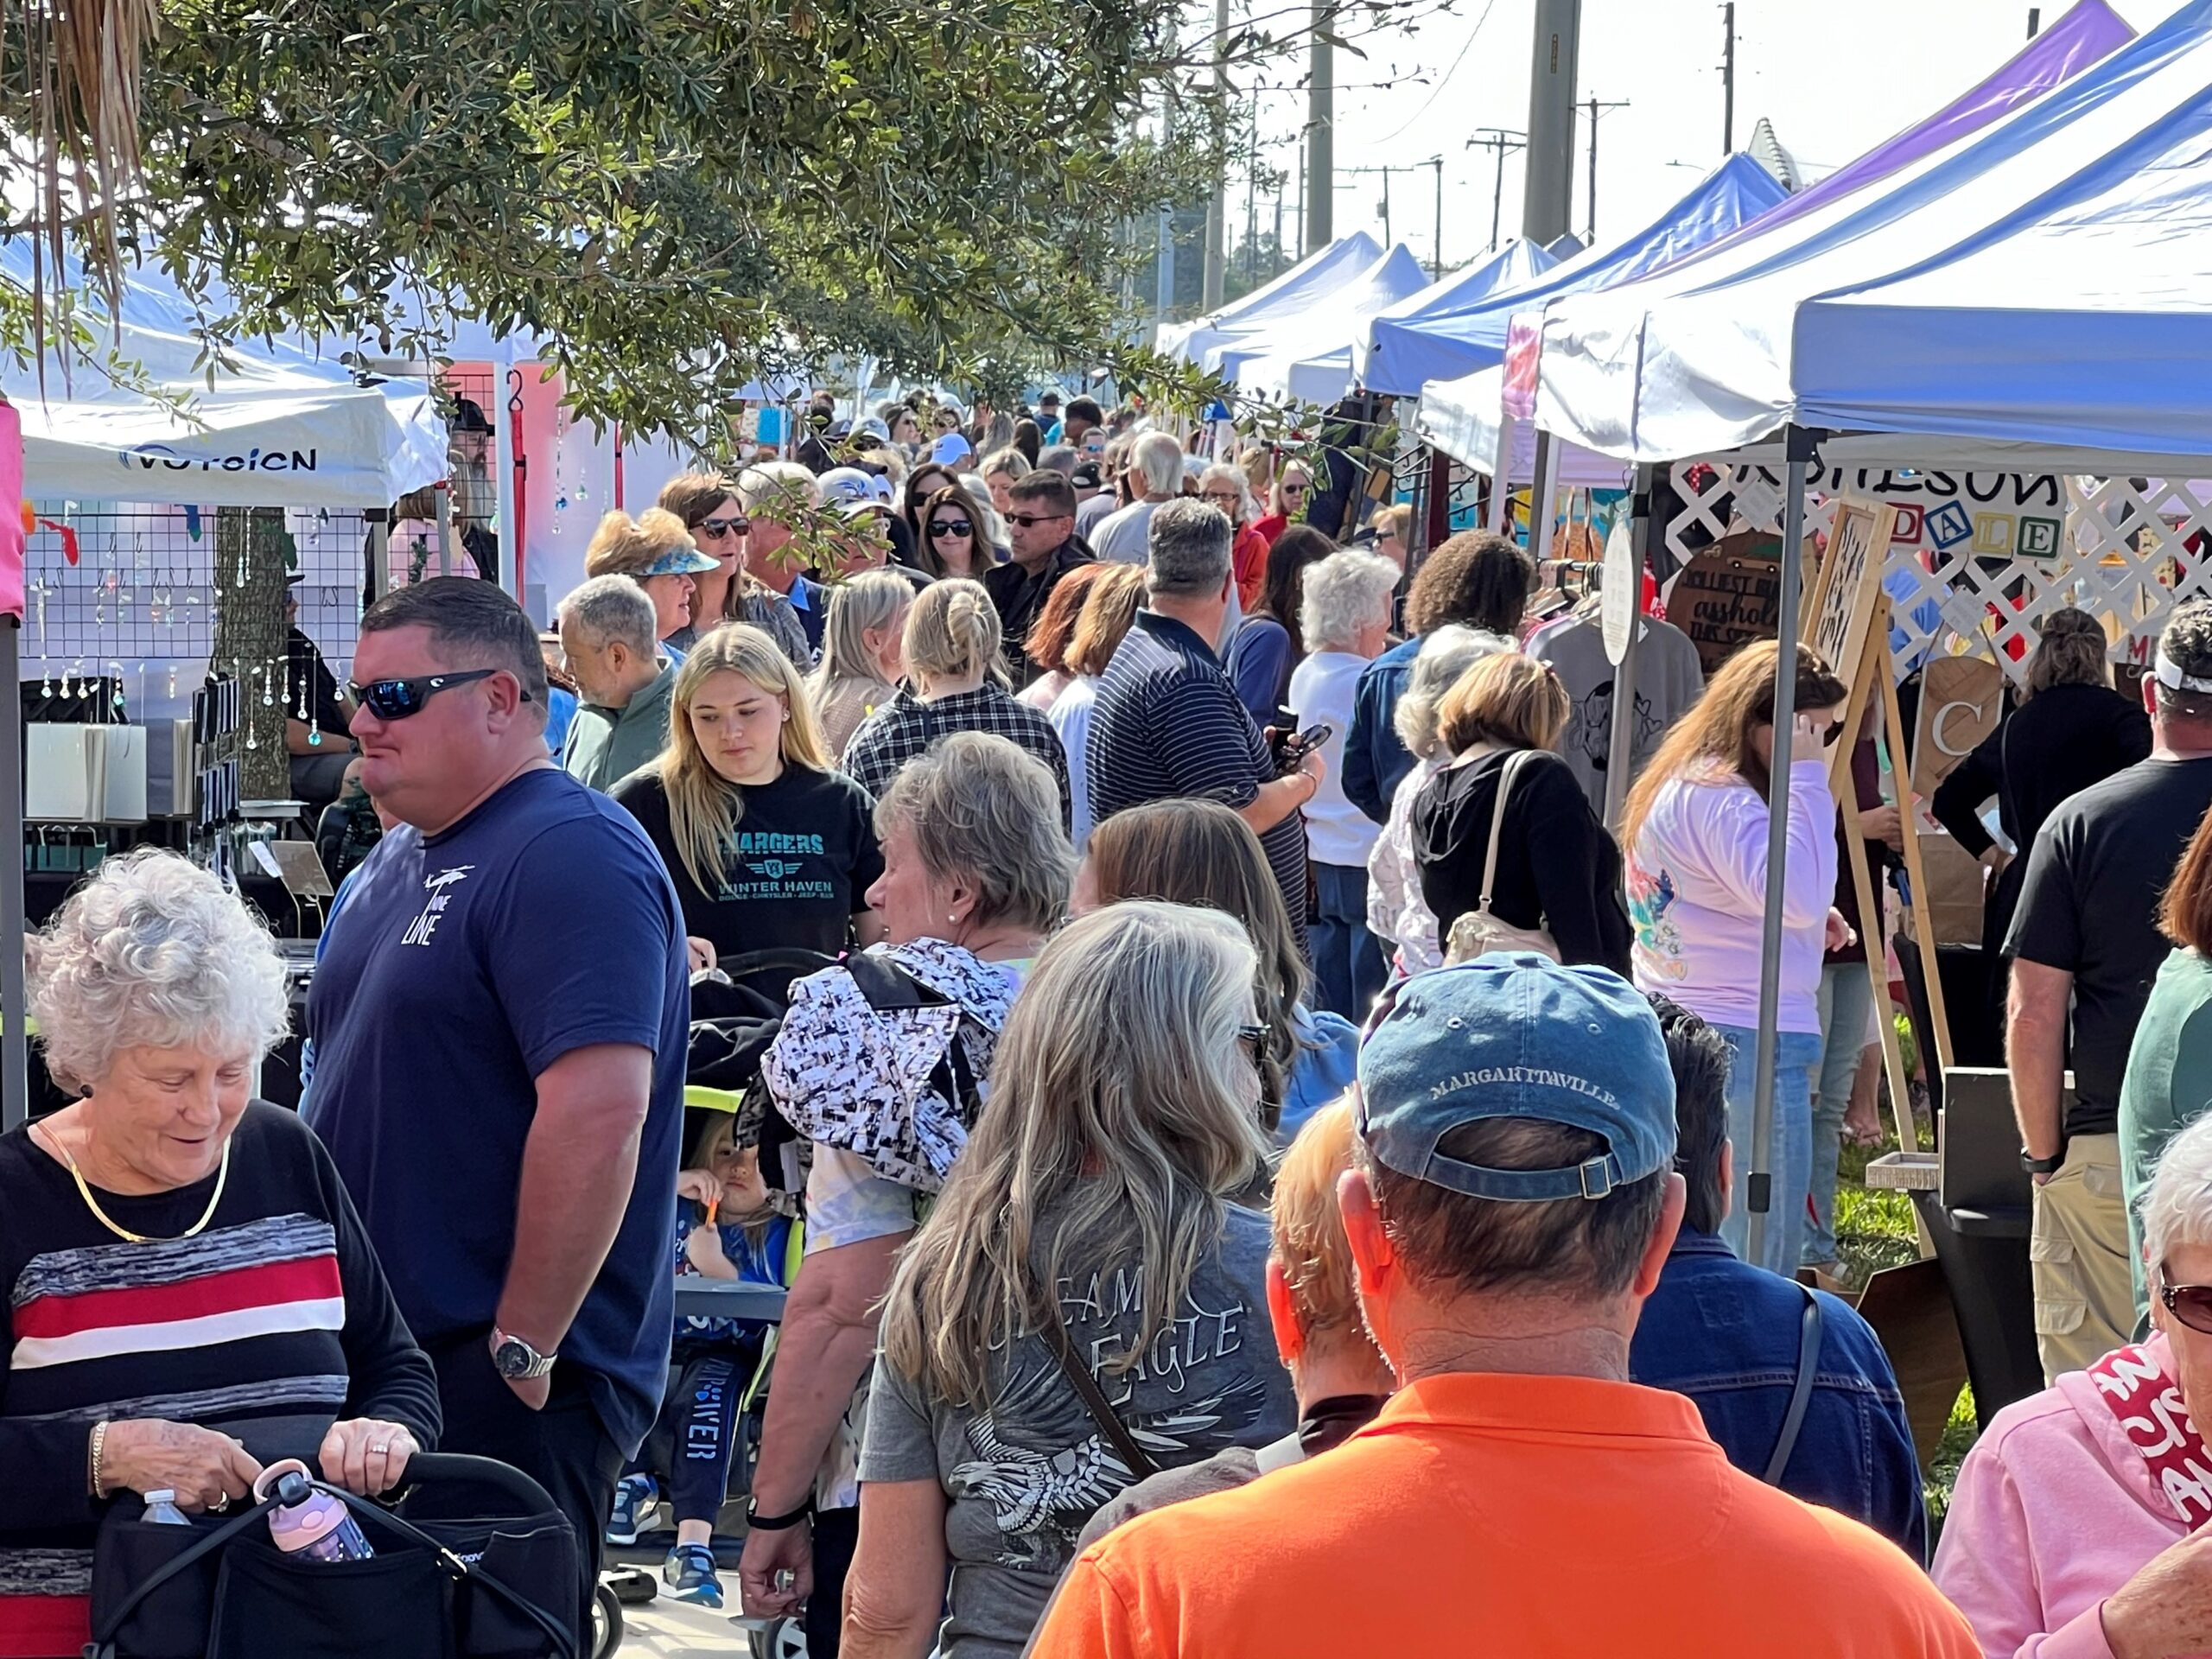 People gathering at the Haven Holiday Market in Winter haven